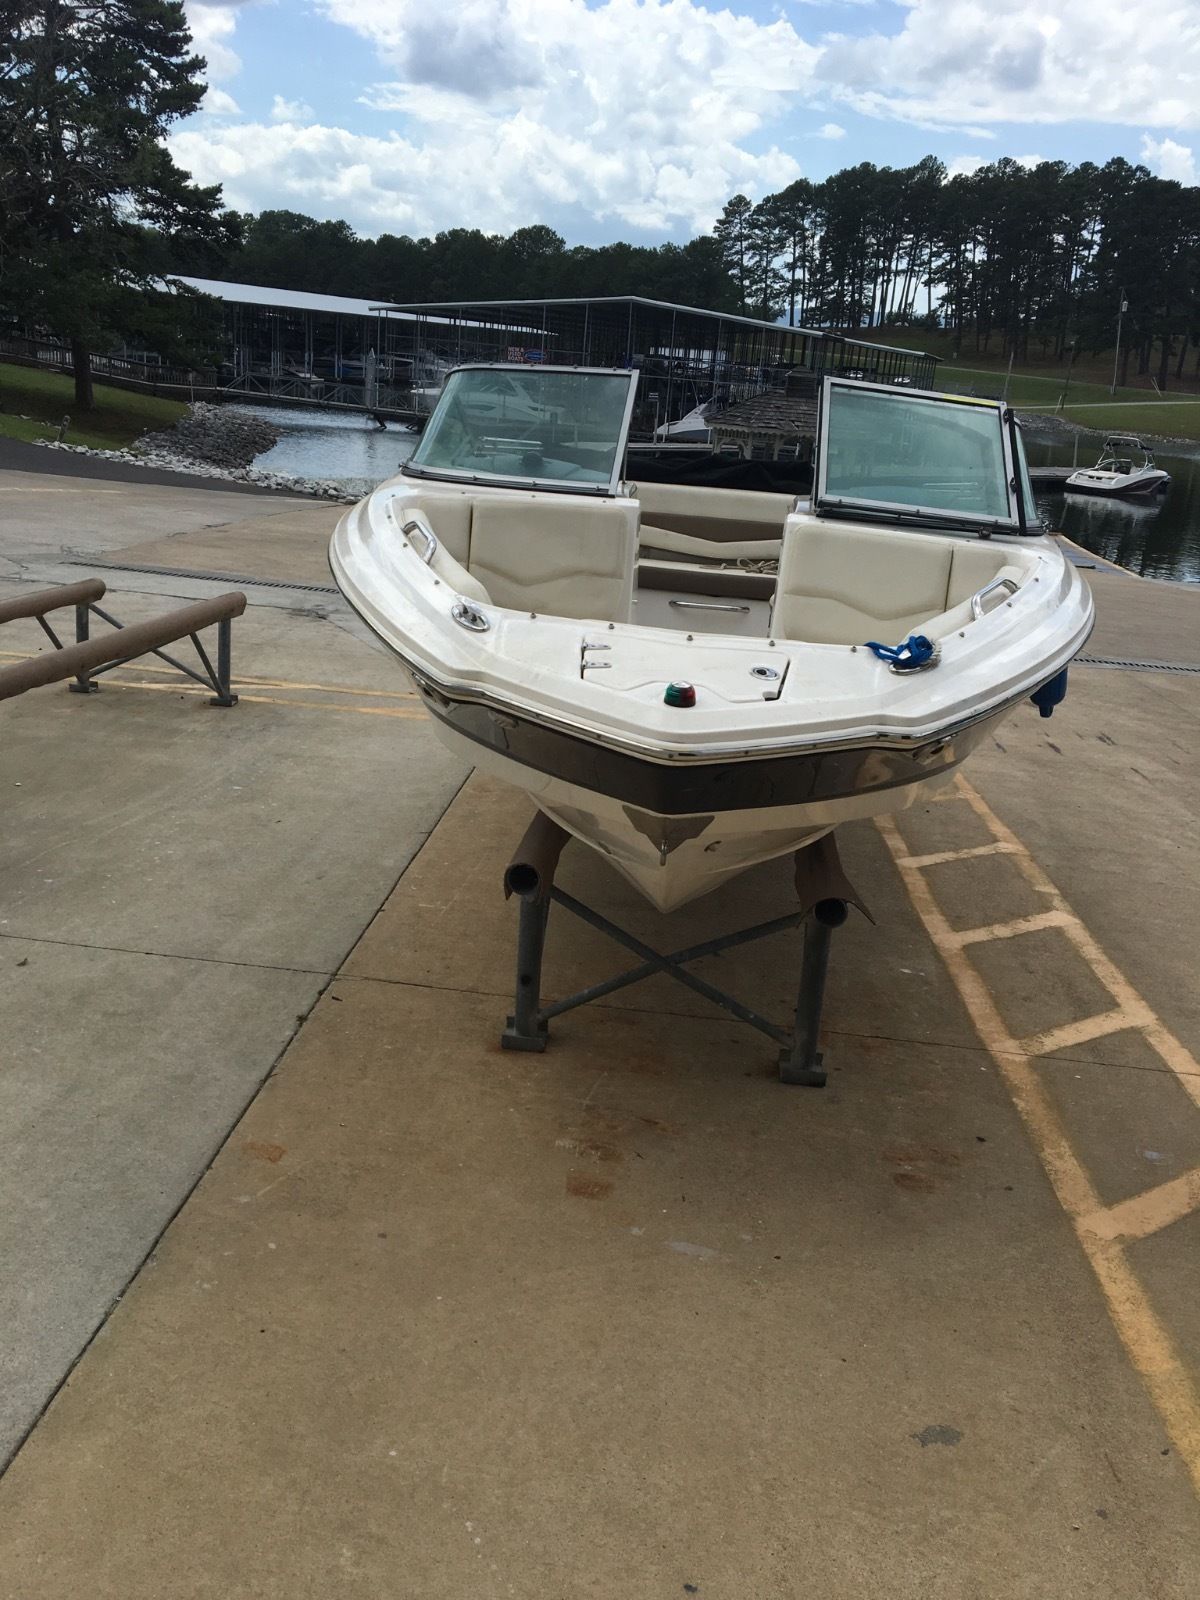 Chaparral 2013 for sale for $29,000 - Boats-from-USA.com